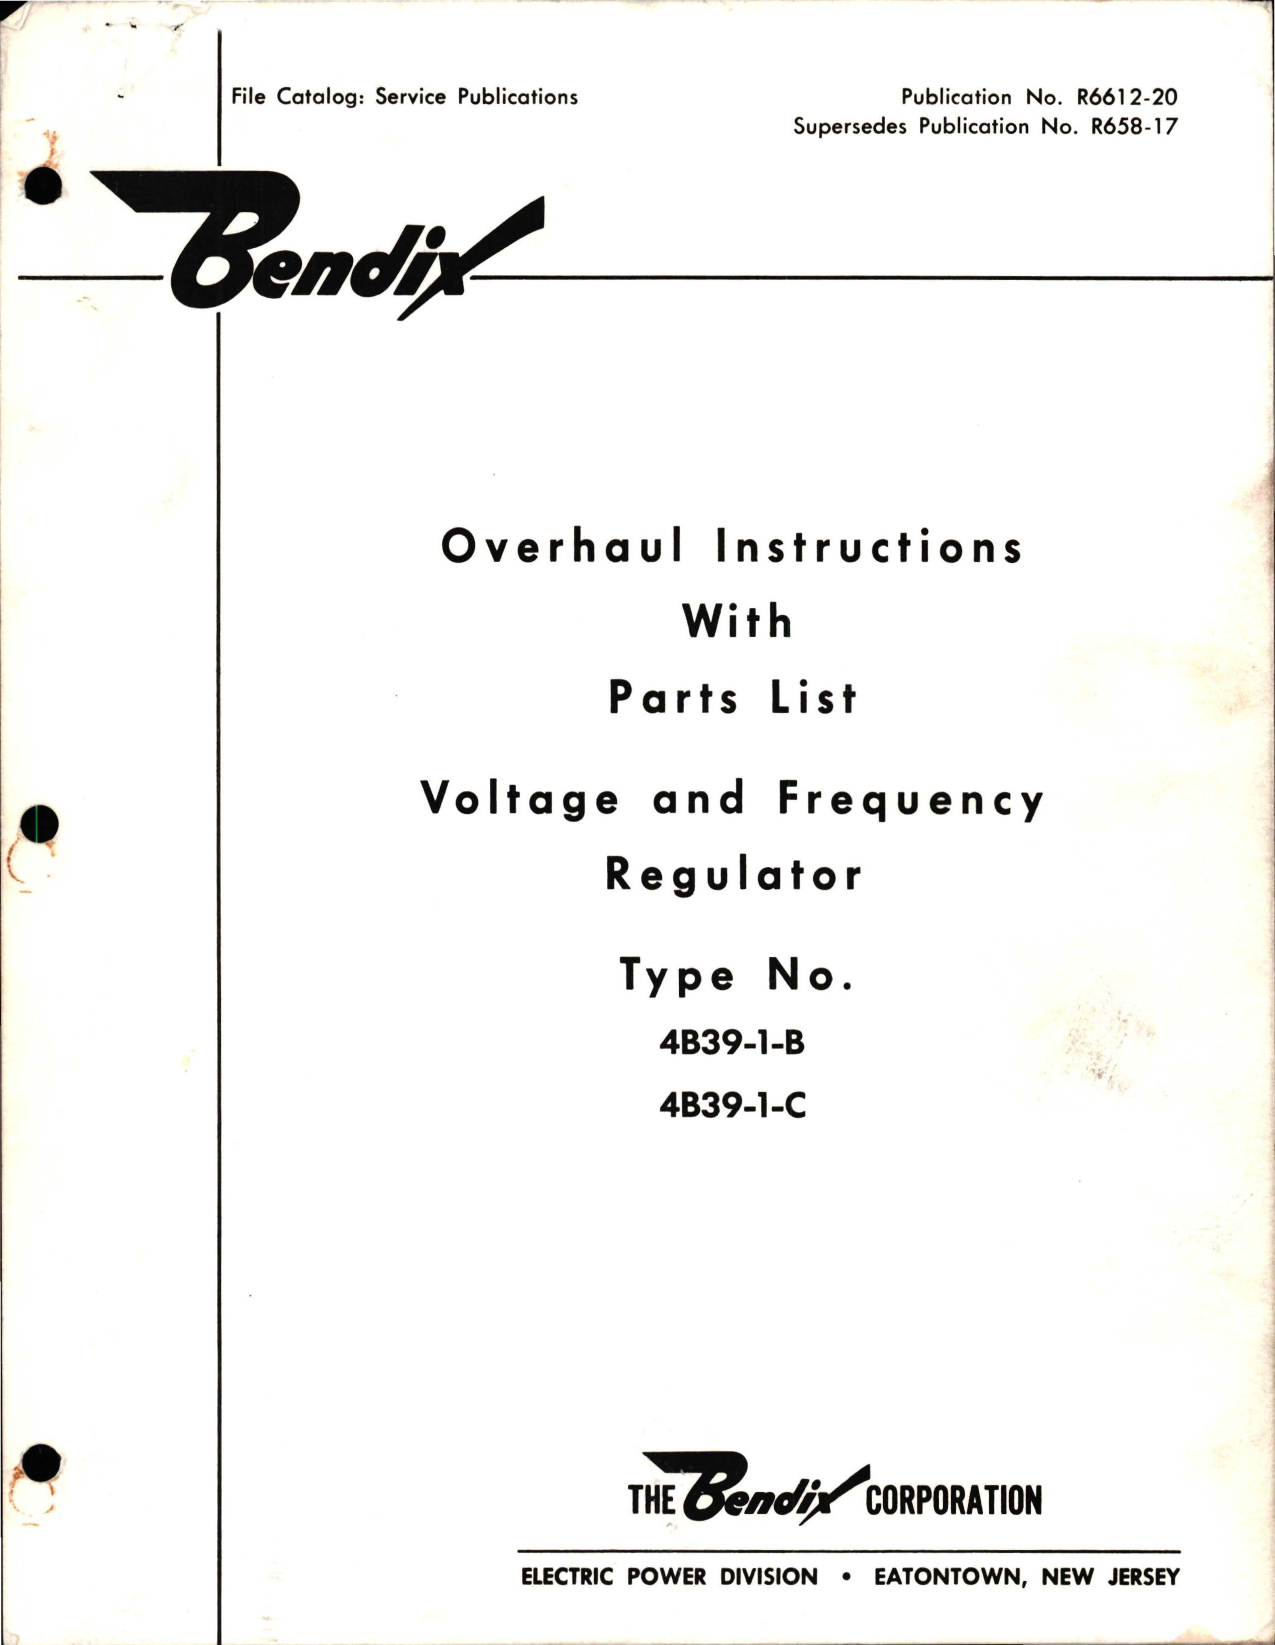 Sample page 1 from AirCorps Library document: Overhaul Instructions with Parts List for Voltage & Frequency Regulator - Types 4B39-1-B, 4B39-1-C